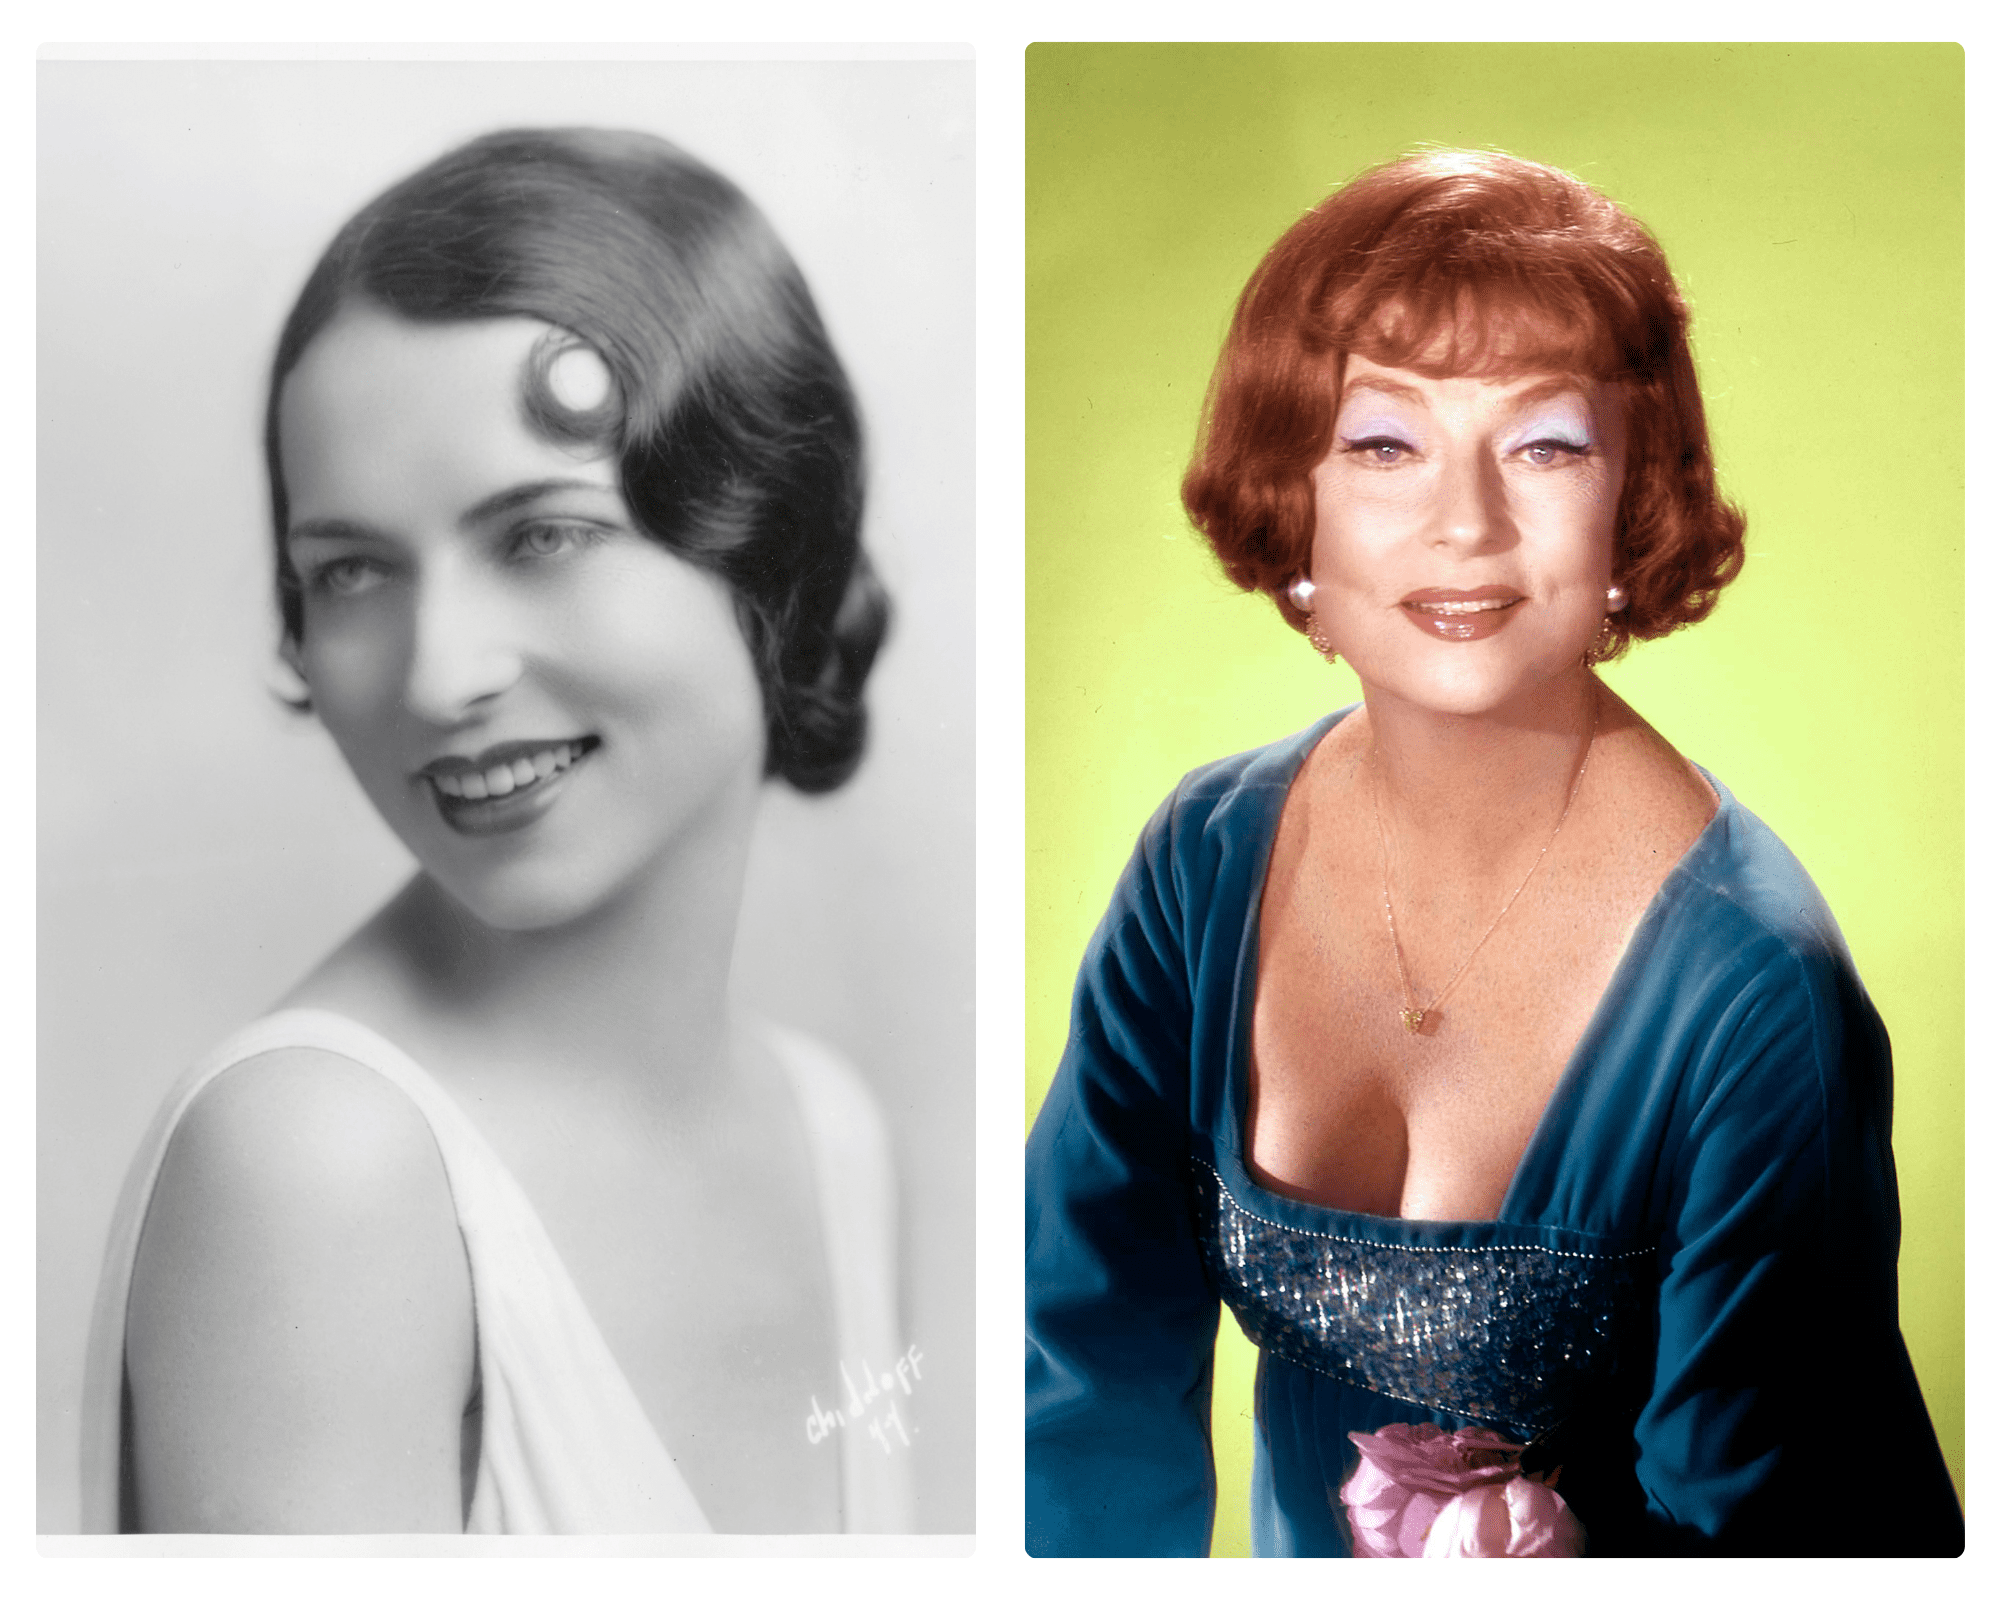 Agnes Moorehead | Source: Getty Images